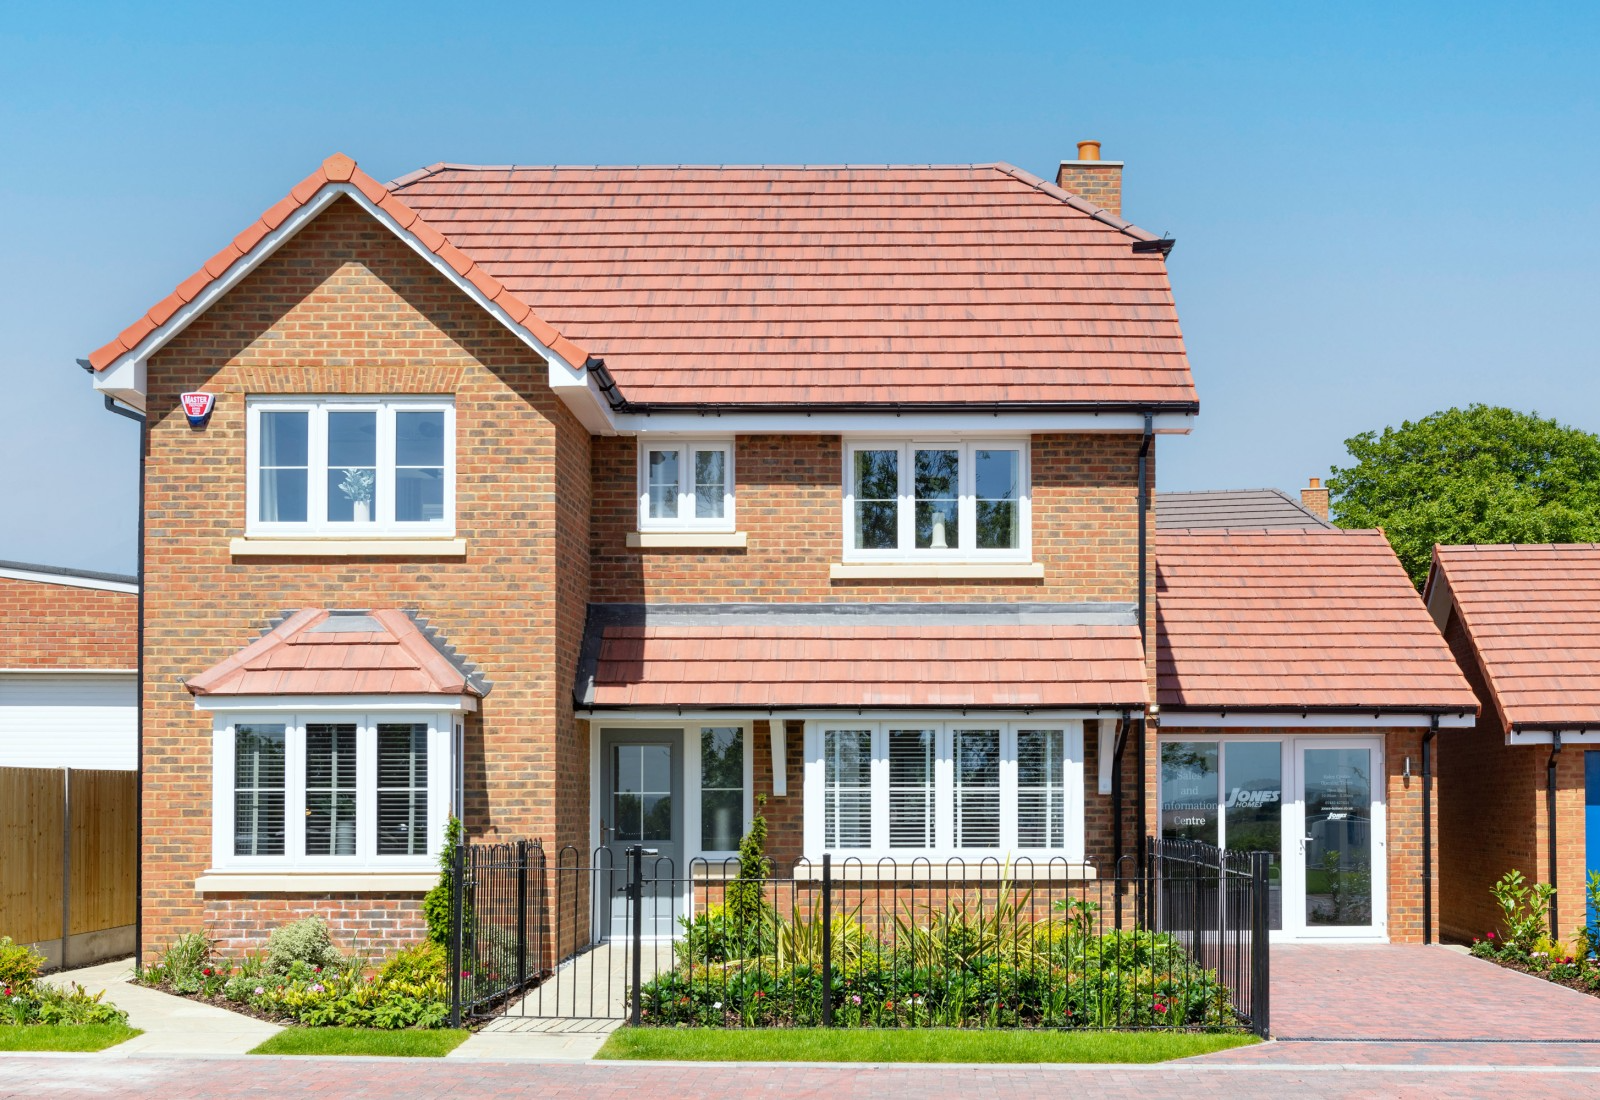 The Northwood Show Home